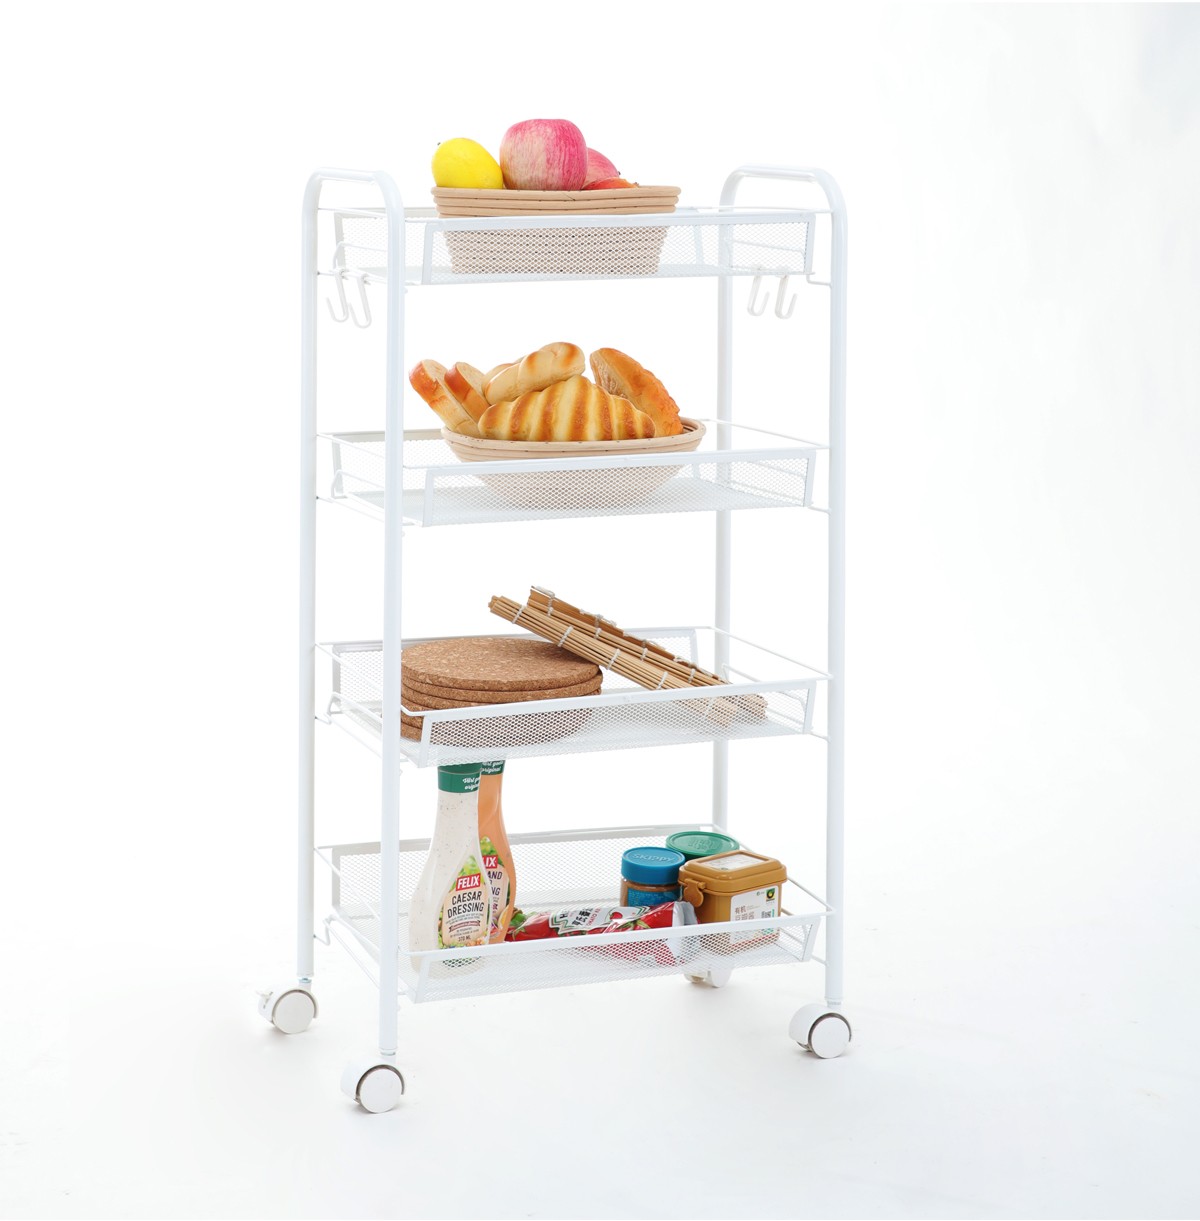 4-Tier Metal Utility Rolling Cart / Mesh Wire Storage Trolley / Slide Out Storage Shelving Units for